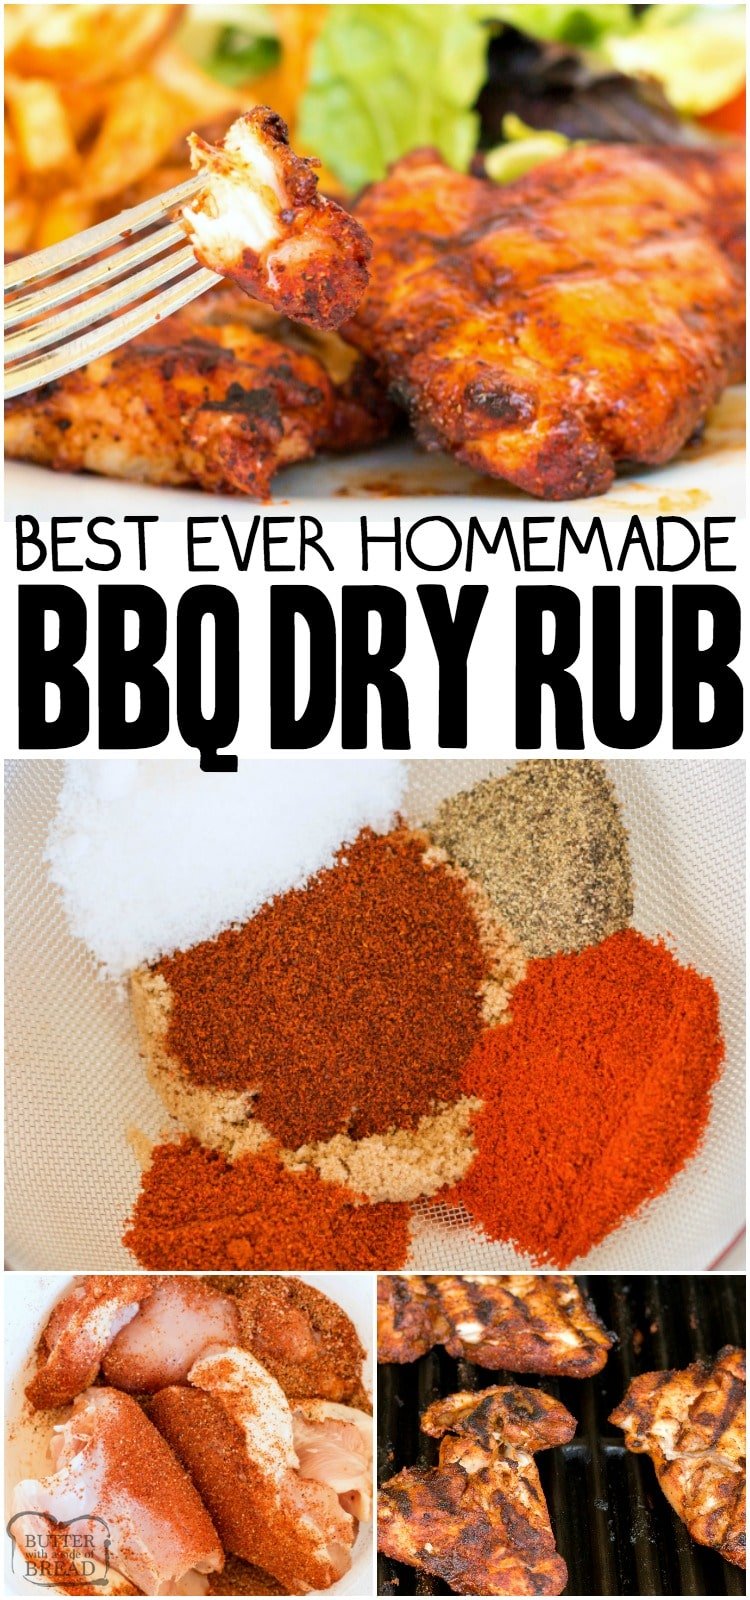 Best BBQ Dry Rub that can be used on chicken, beef, pork and fish.  BBQ rub recipe that is simple to make and adds a great flavor to grilled meats.